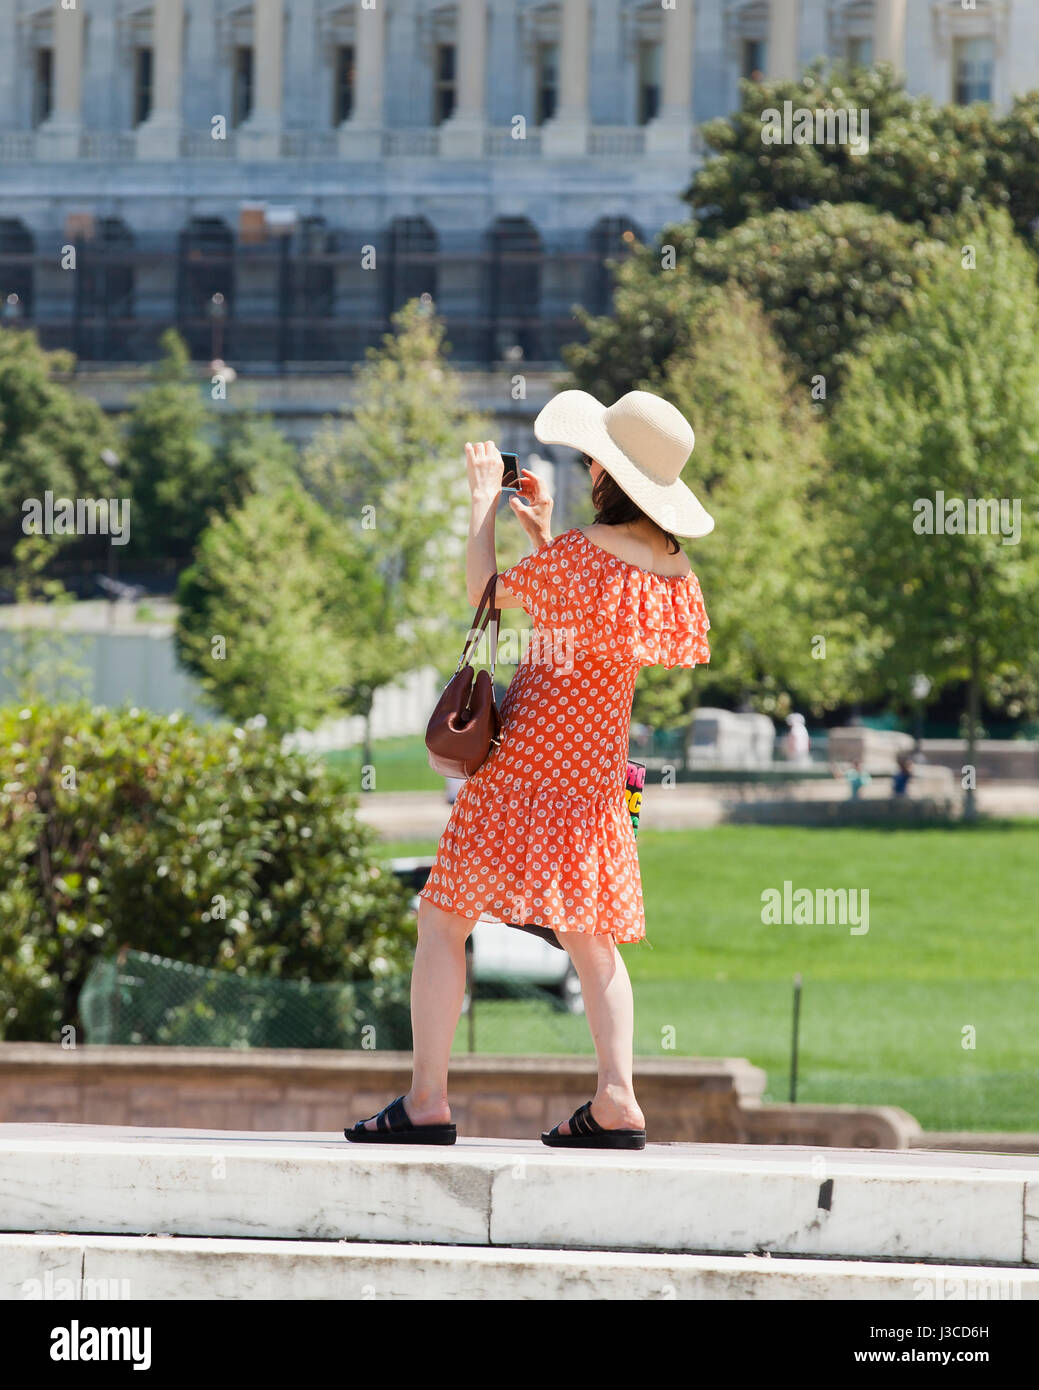 Woman taking photos with mobile phone - USA Stock Photo